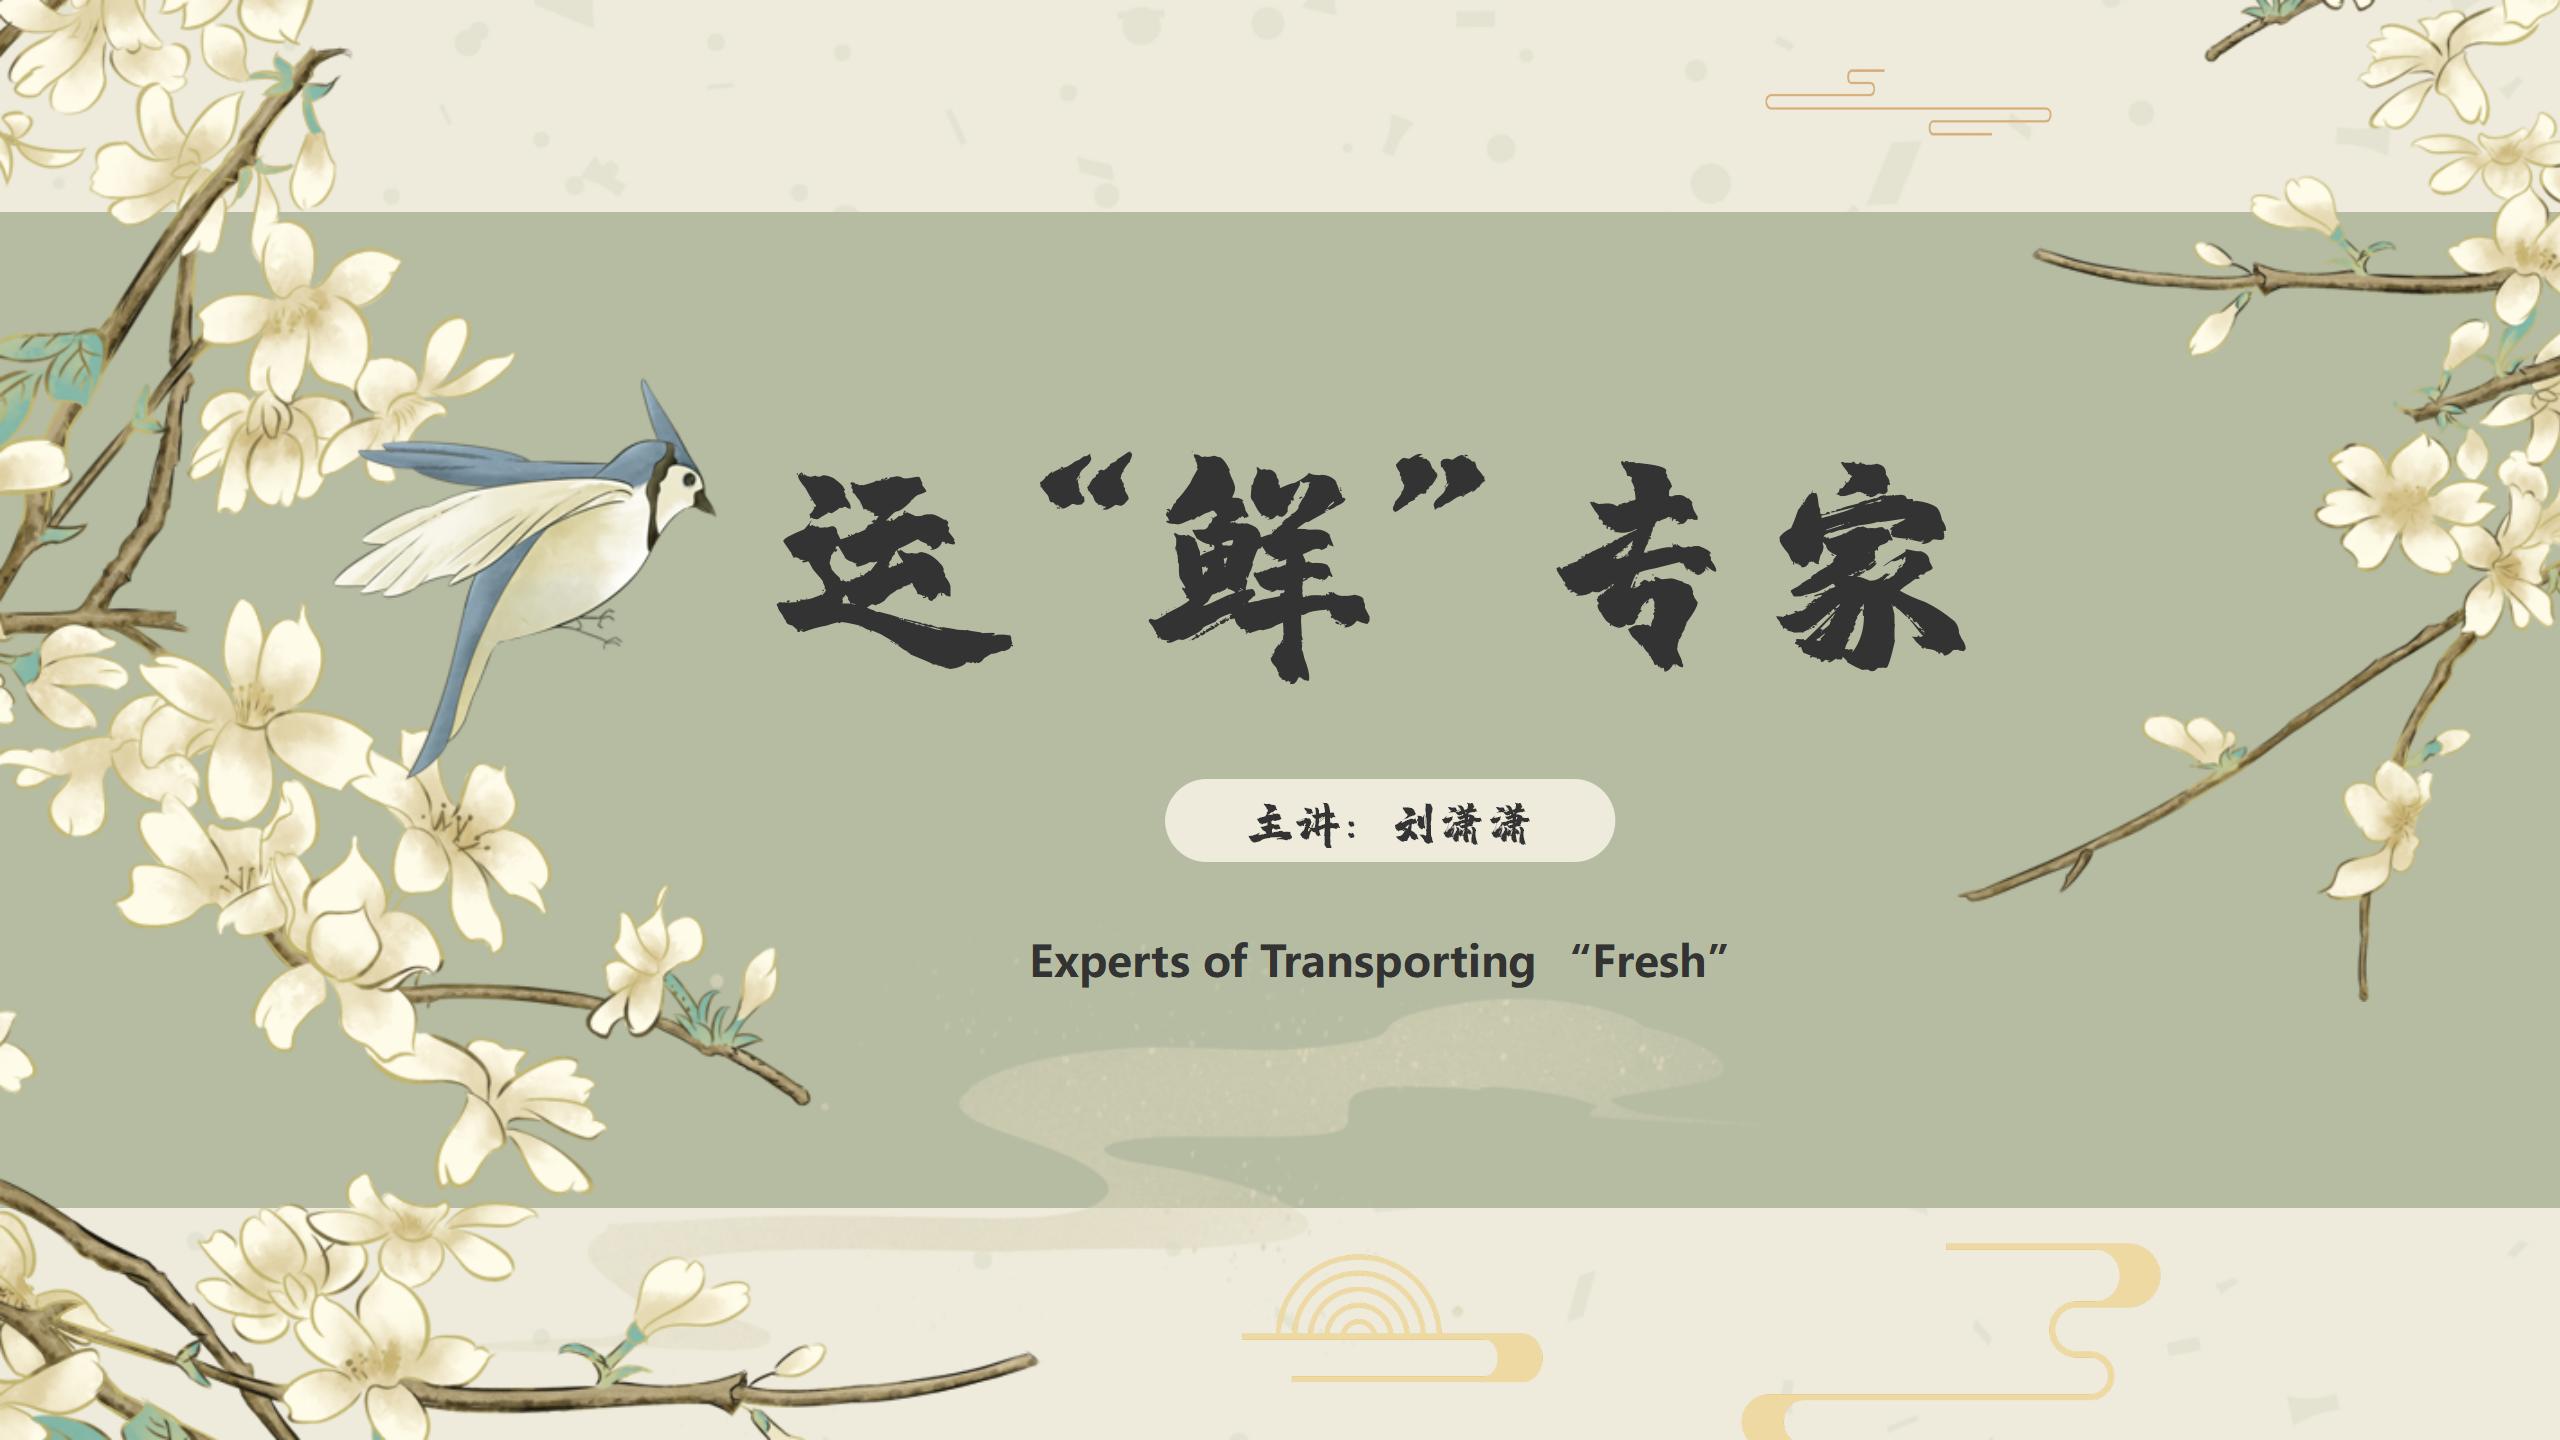 Experts of Transporting “Fresh”